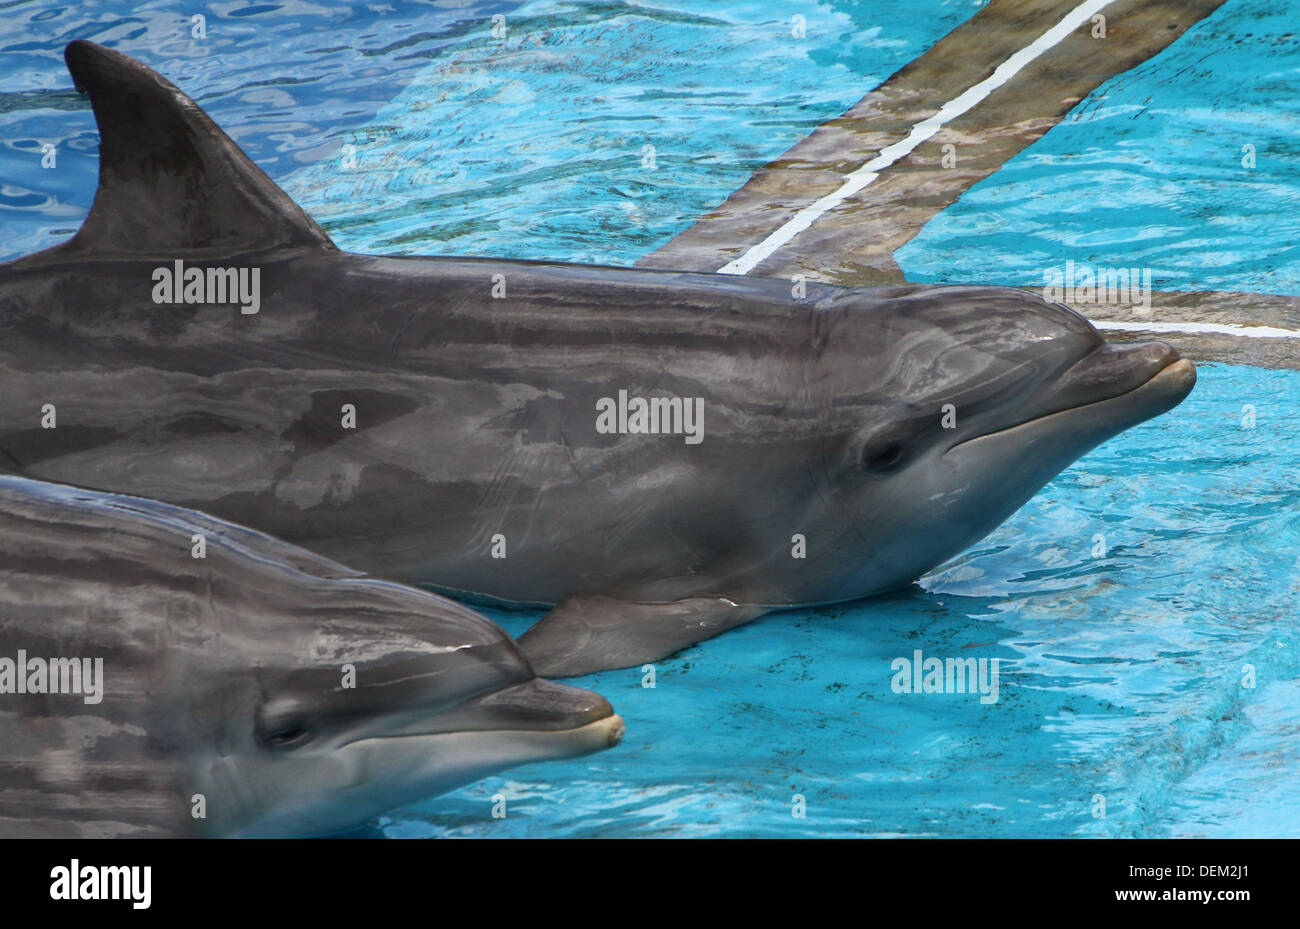 Bottlenose dolphins during a show at the Oceanografic Aquarium Marine Park & Zoo in Valencia, Spain Stock Photo